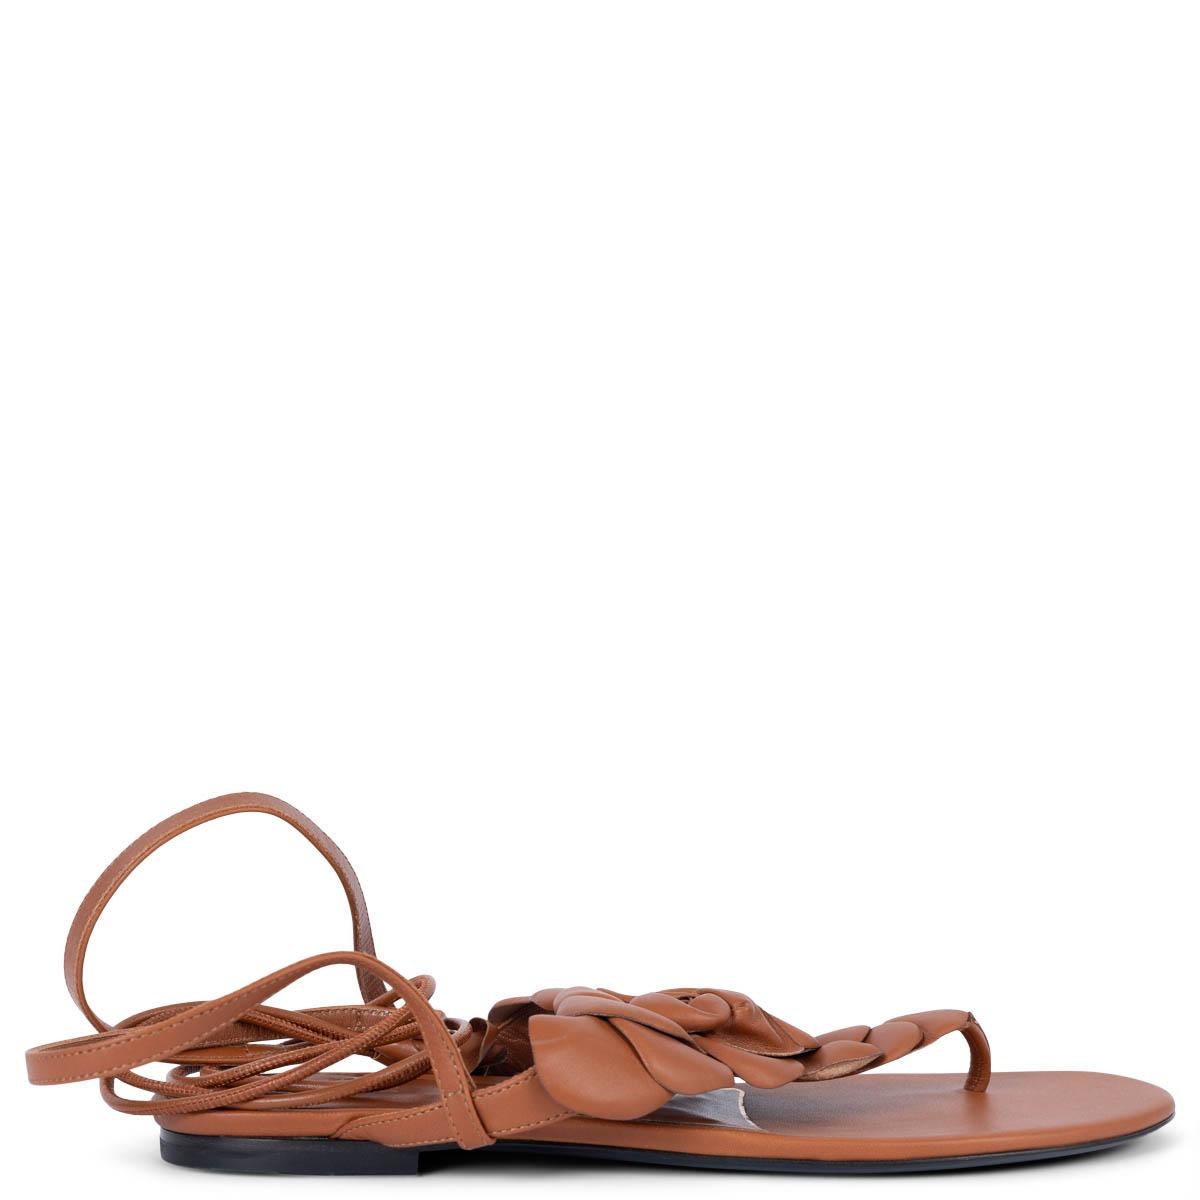 100% authentic Valentino 03 Rose Edition Atelier flower appliqué ankle tie thong flat sandals in cognac brown leather. Have been worn once inside and are in virtually new condition. 

Measurements
Imprinted Size	38.5
Shoe Size	38.5
Inside